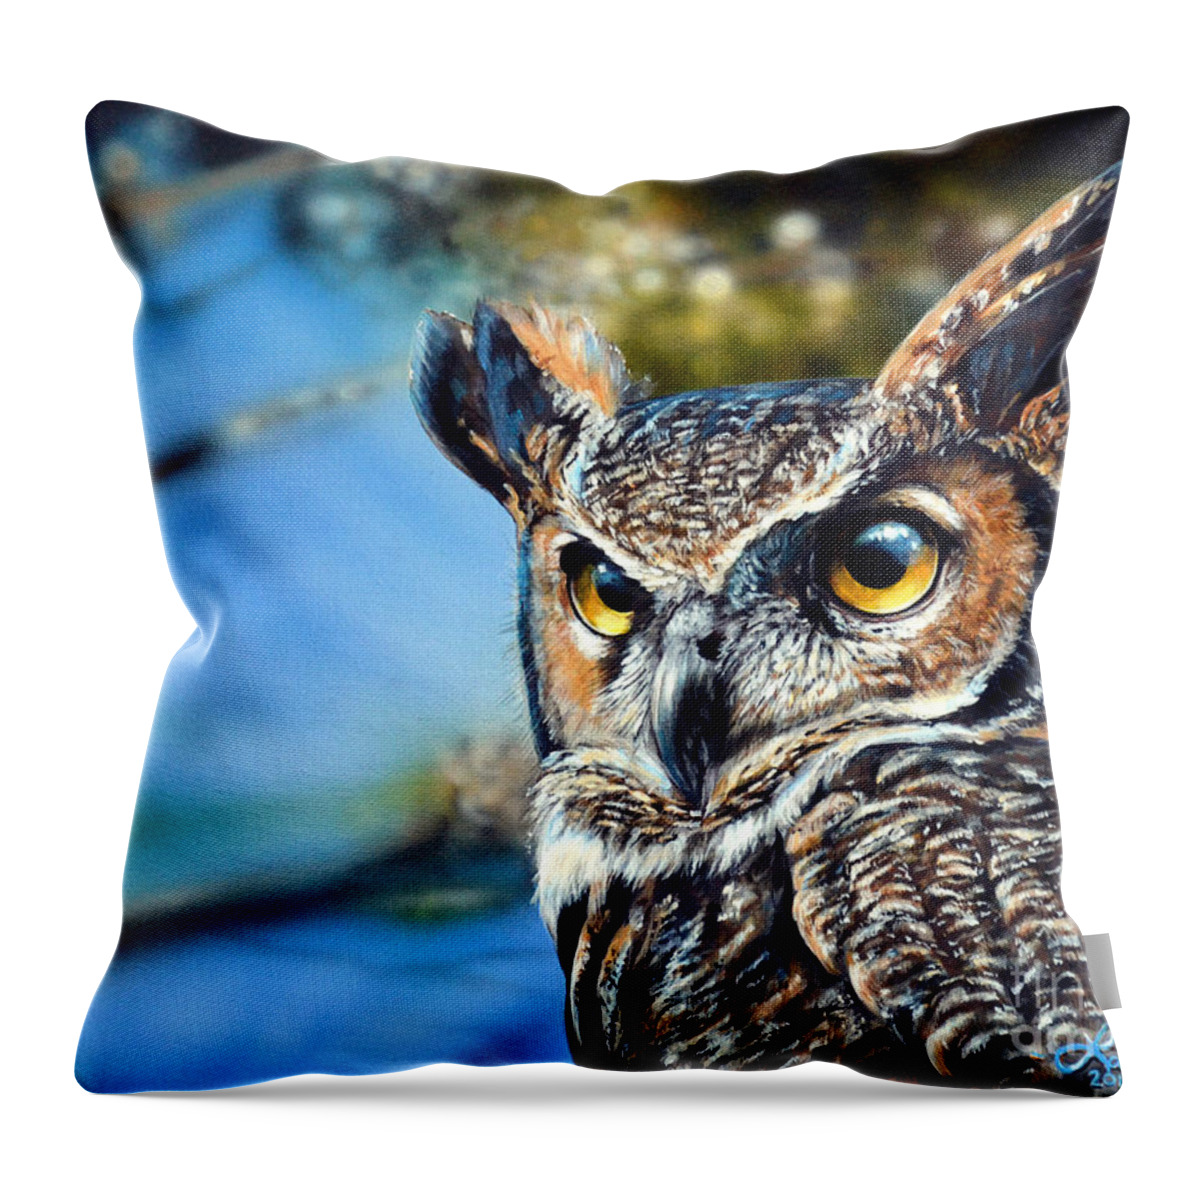 Great Horned Owl Throw Pillow featuring the painting Great Horned Owl by Lisa Clough Lachri